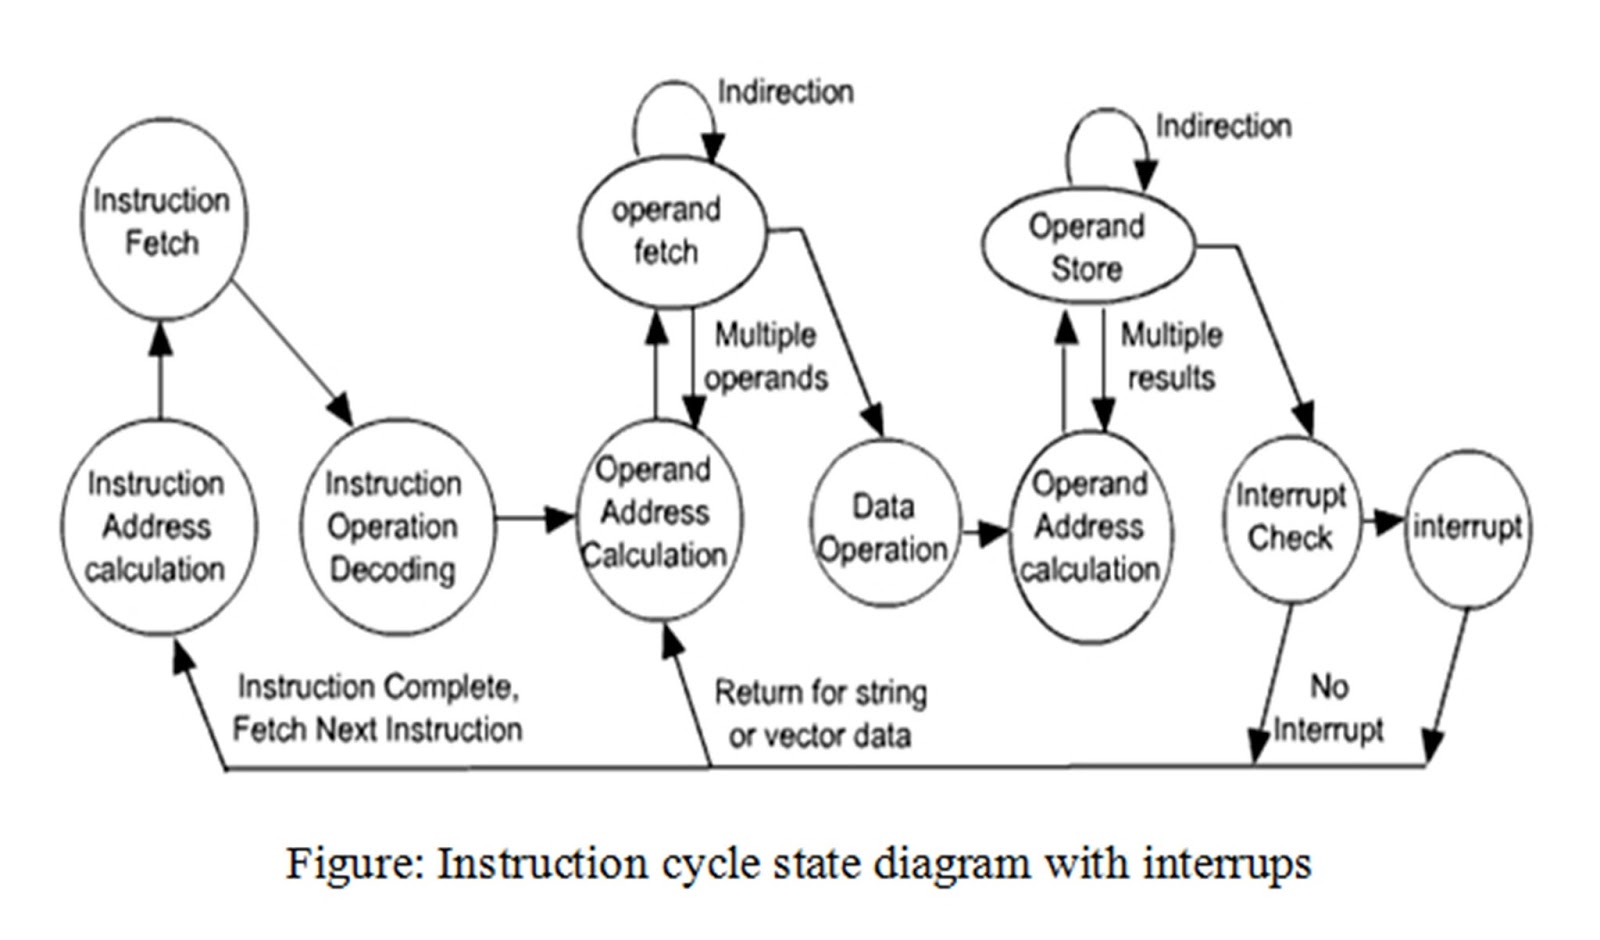 Describe The Instruction Cycle State Diagram With Interrupts. - M.m.r ...